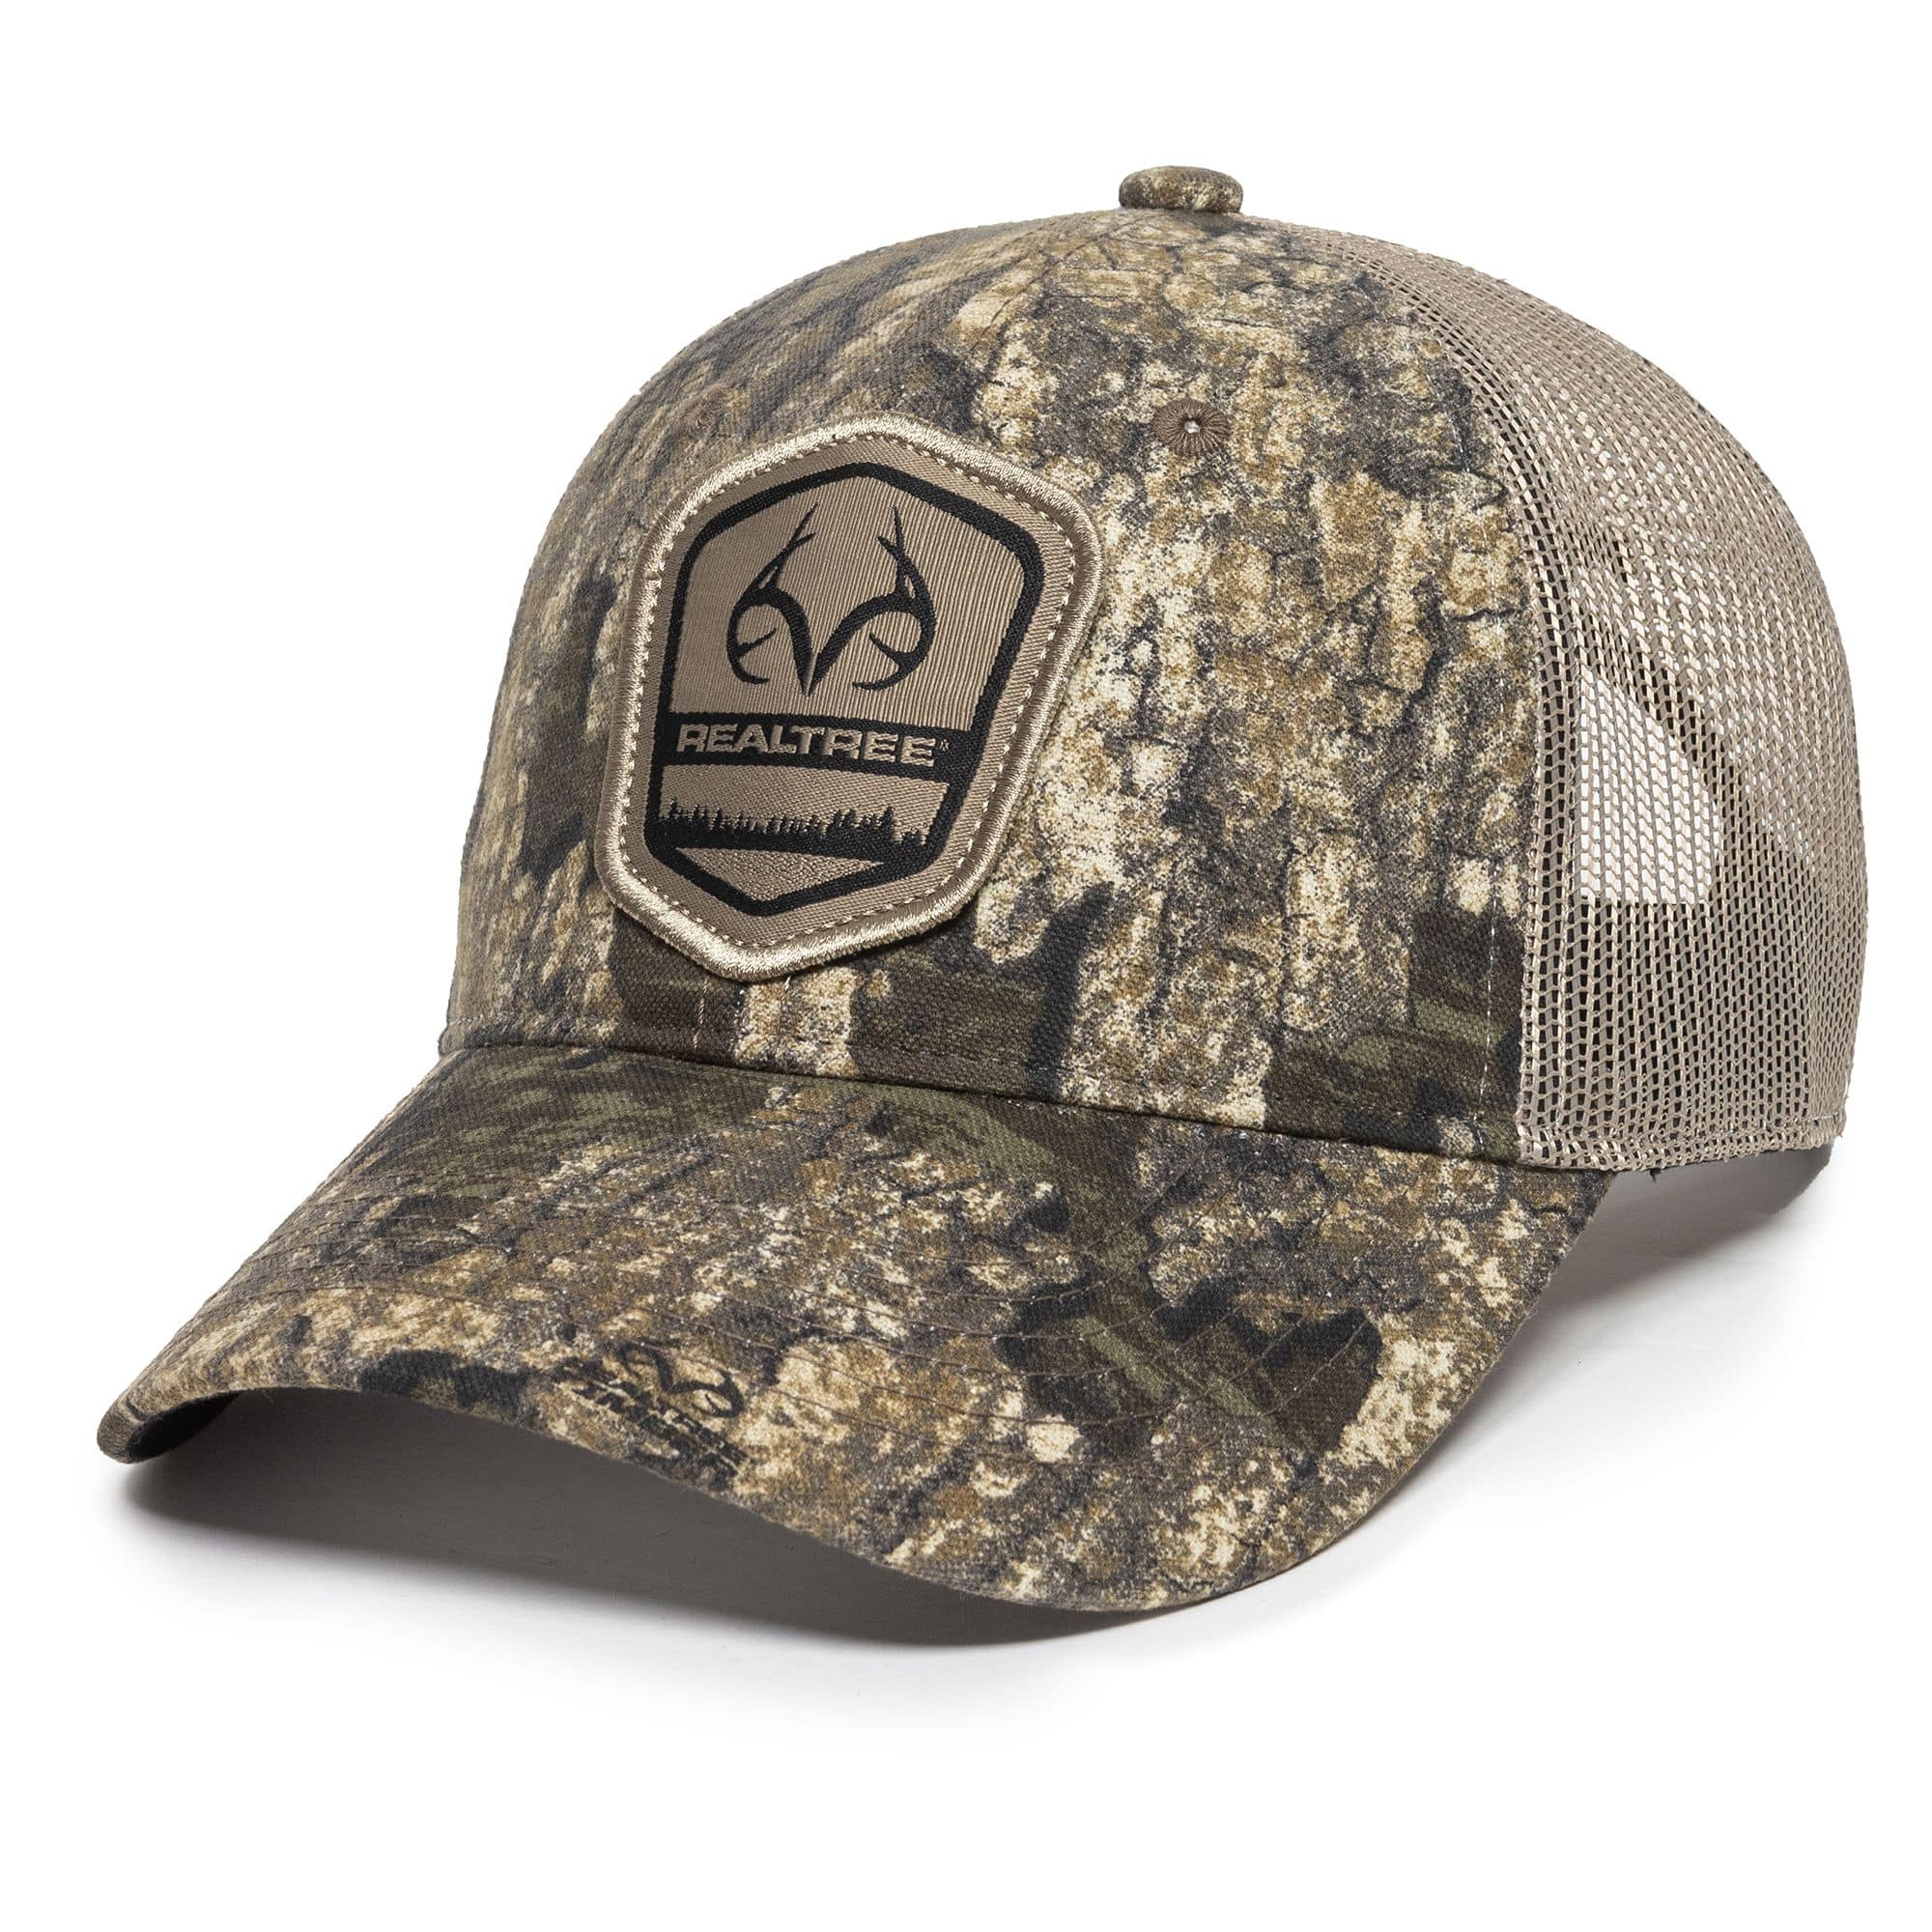 https://media-www.canadiantire.ca/product/playing/hunting/hunting-apparel-footwear/3750651/realtree-hat-2-2e15a85a-315d-423d-b162-ad2130ba96cf-jpgrendition.jpg